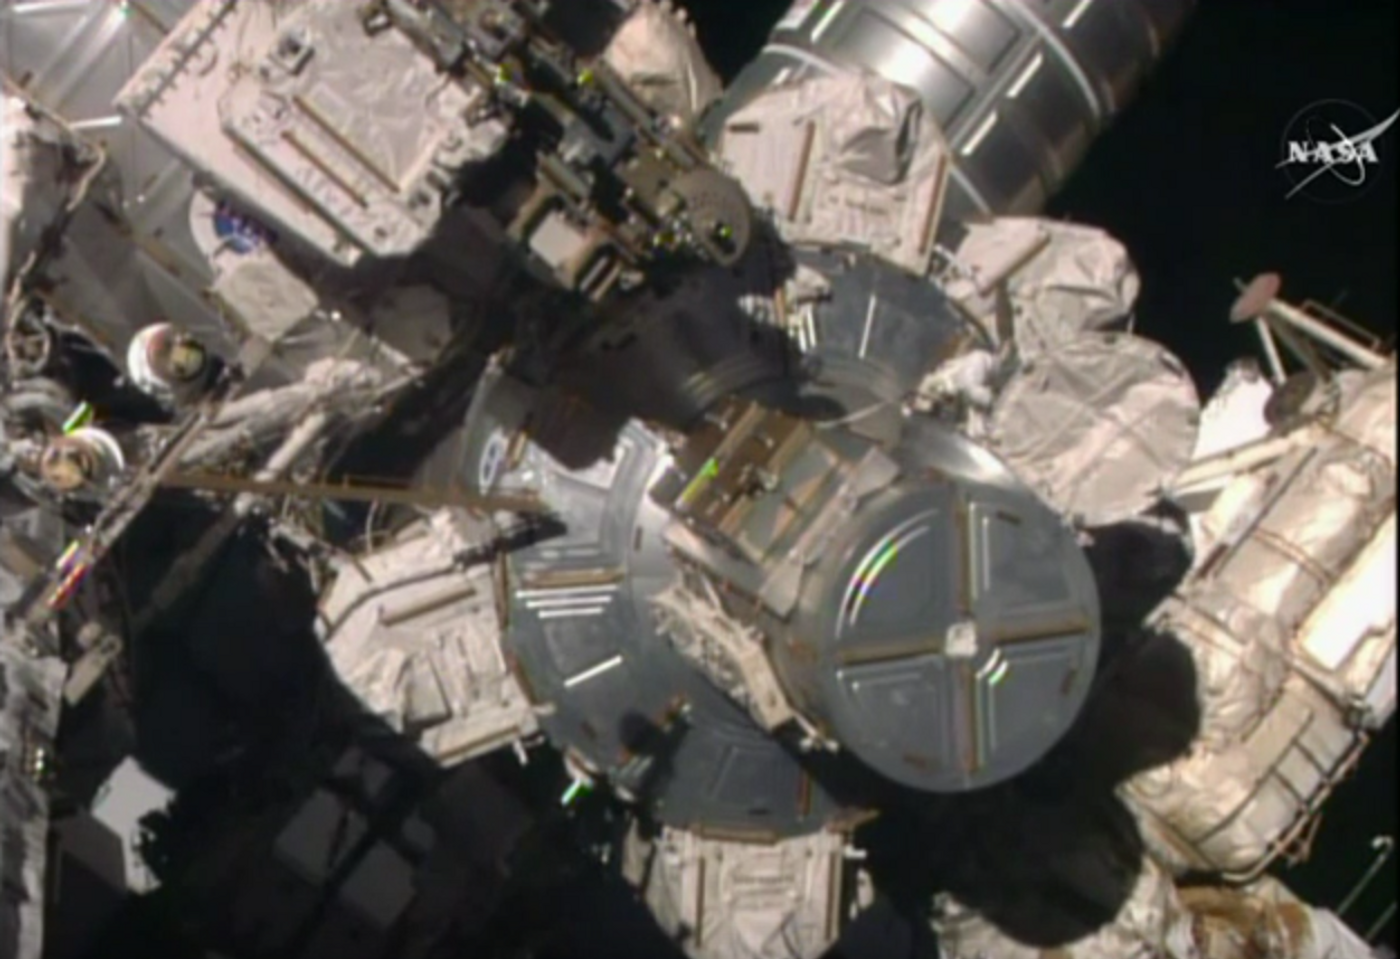 An astronaut performs repairs on the ISS Monday morning.